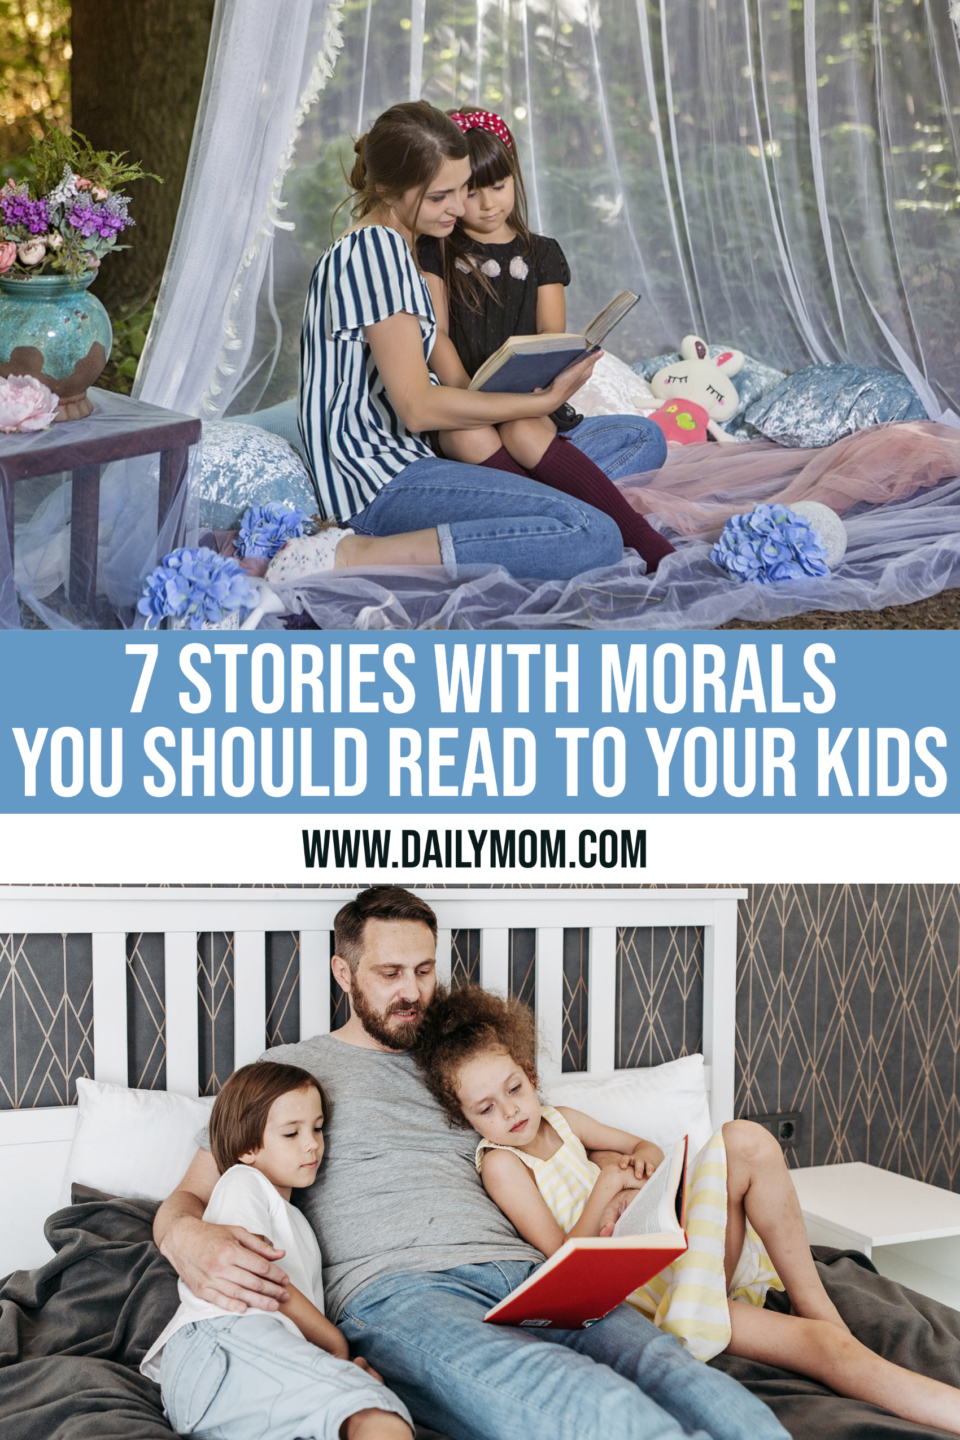 7 Meaningful Stories With Morals For Kids